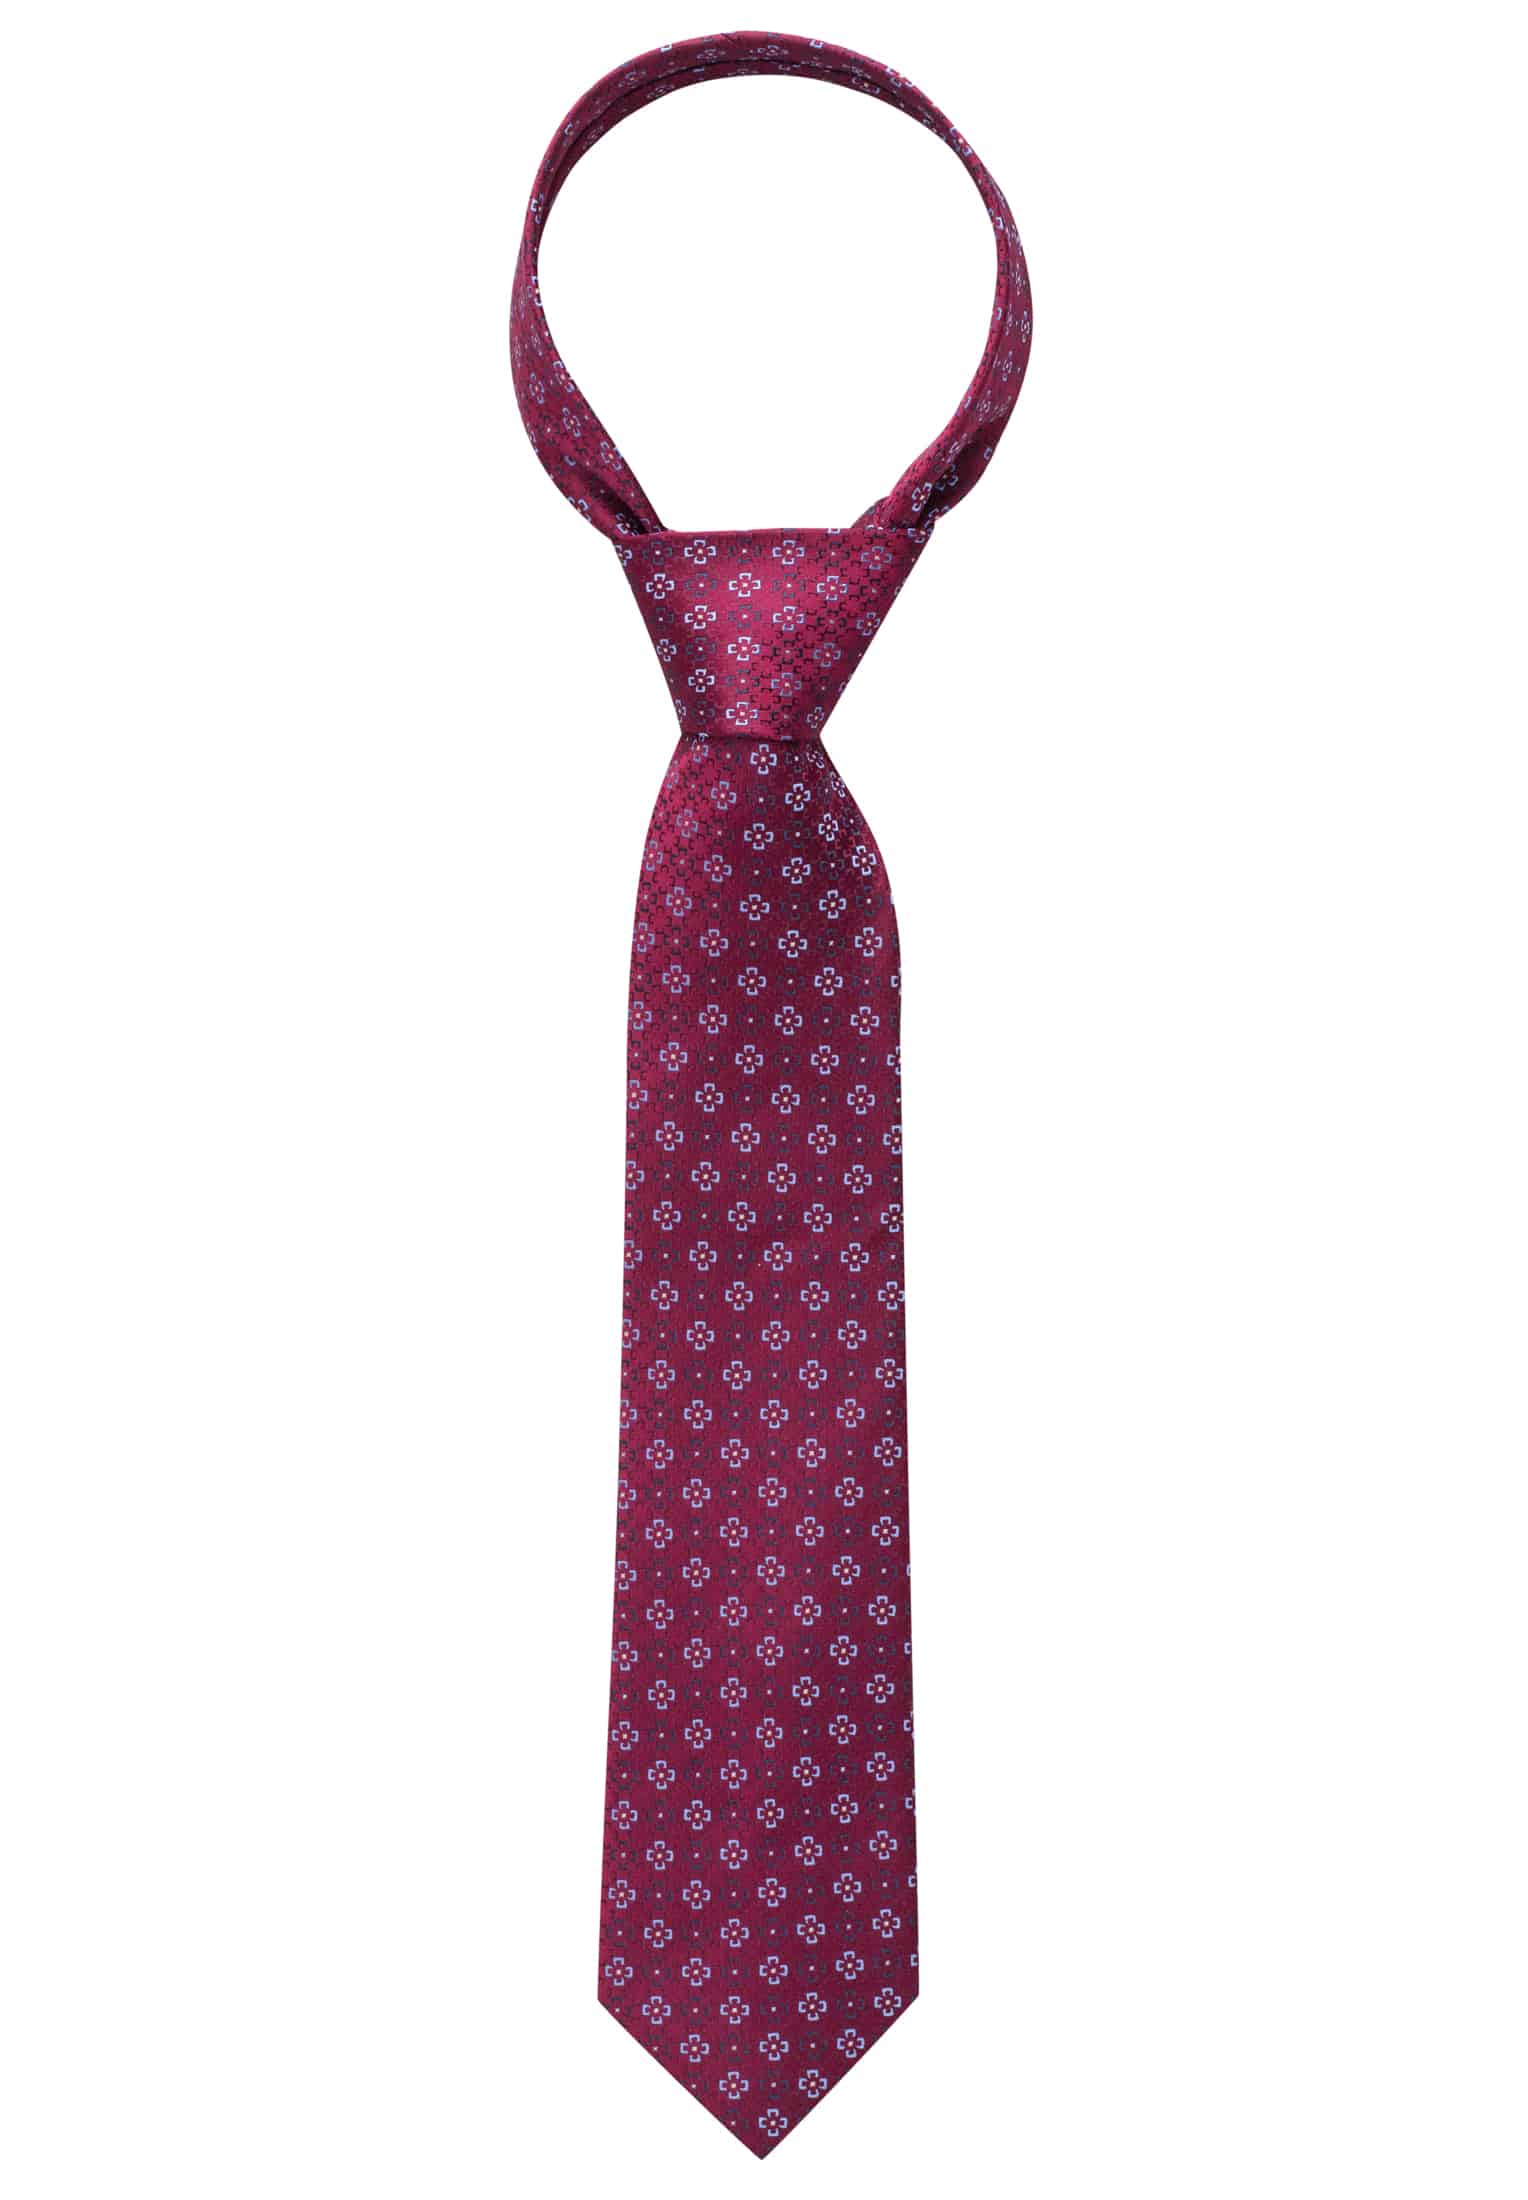 Tie in red patterned